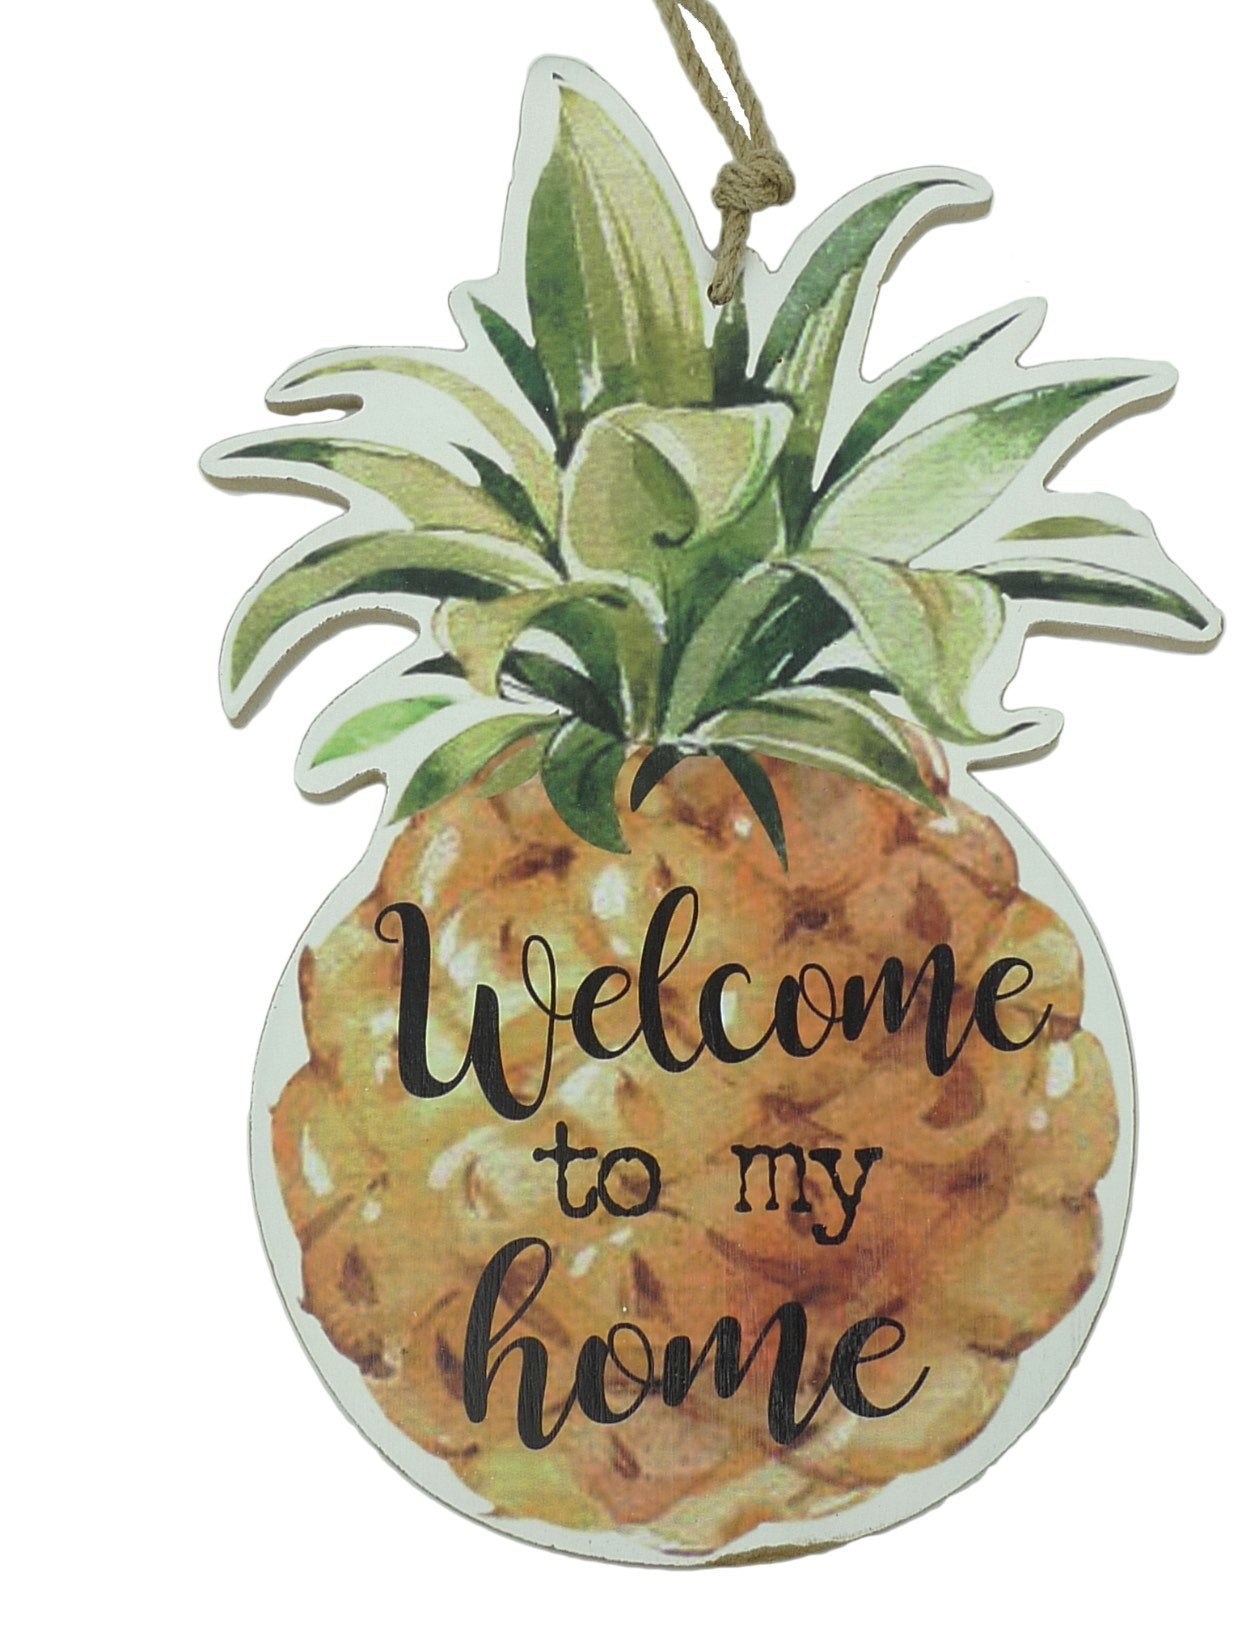 Pineapple sign, welcome to my home sign, patio sign - Greenery Market signs for wreaths